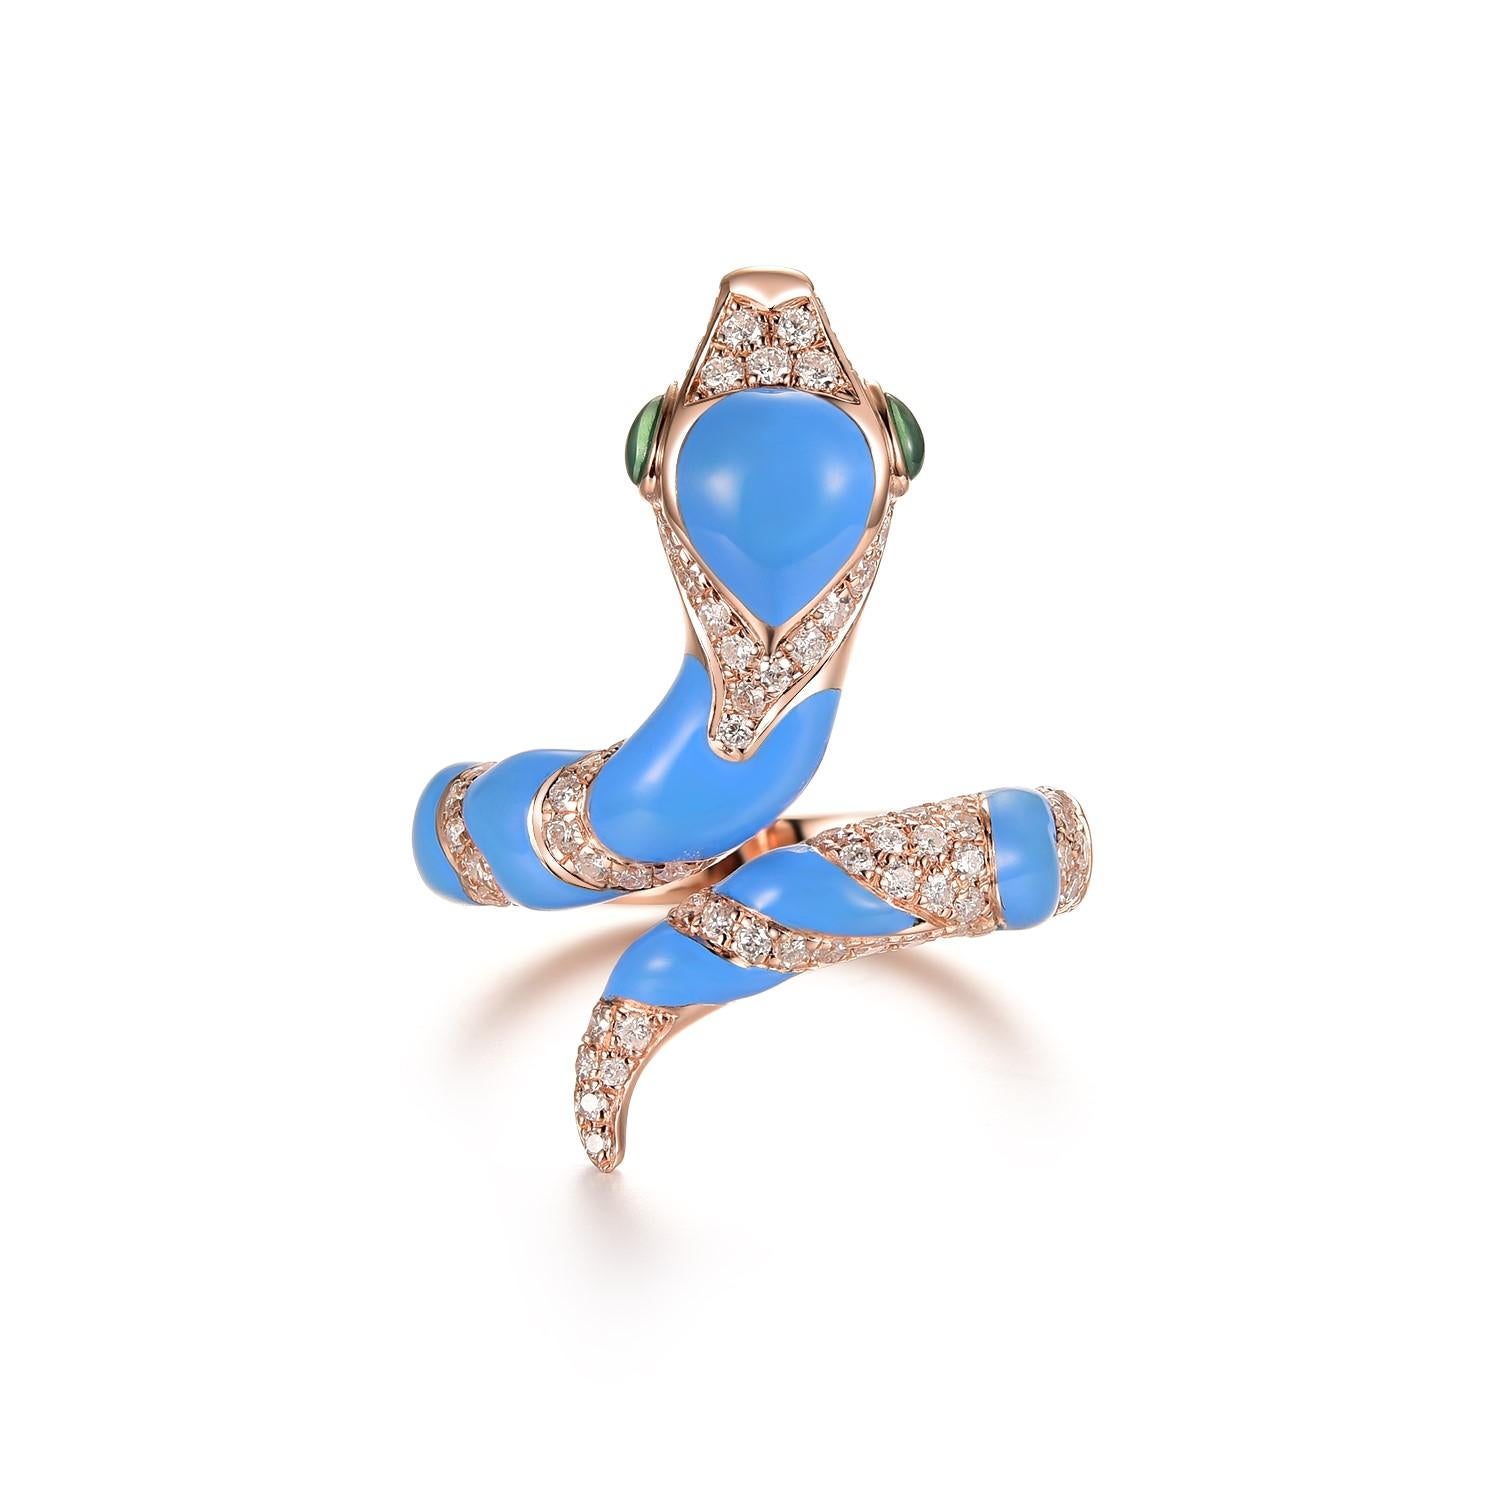 This stunning snake ring features 0.55 carat of white round diamonds, the body is covered with blue enamel. The eyes of the ring is set with green jade. The snake can be customized in any color or stones. Feel free to contact me for inquiry. More